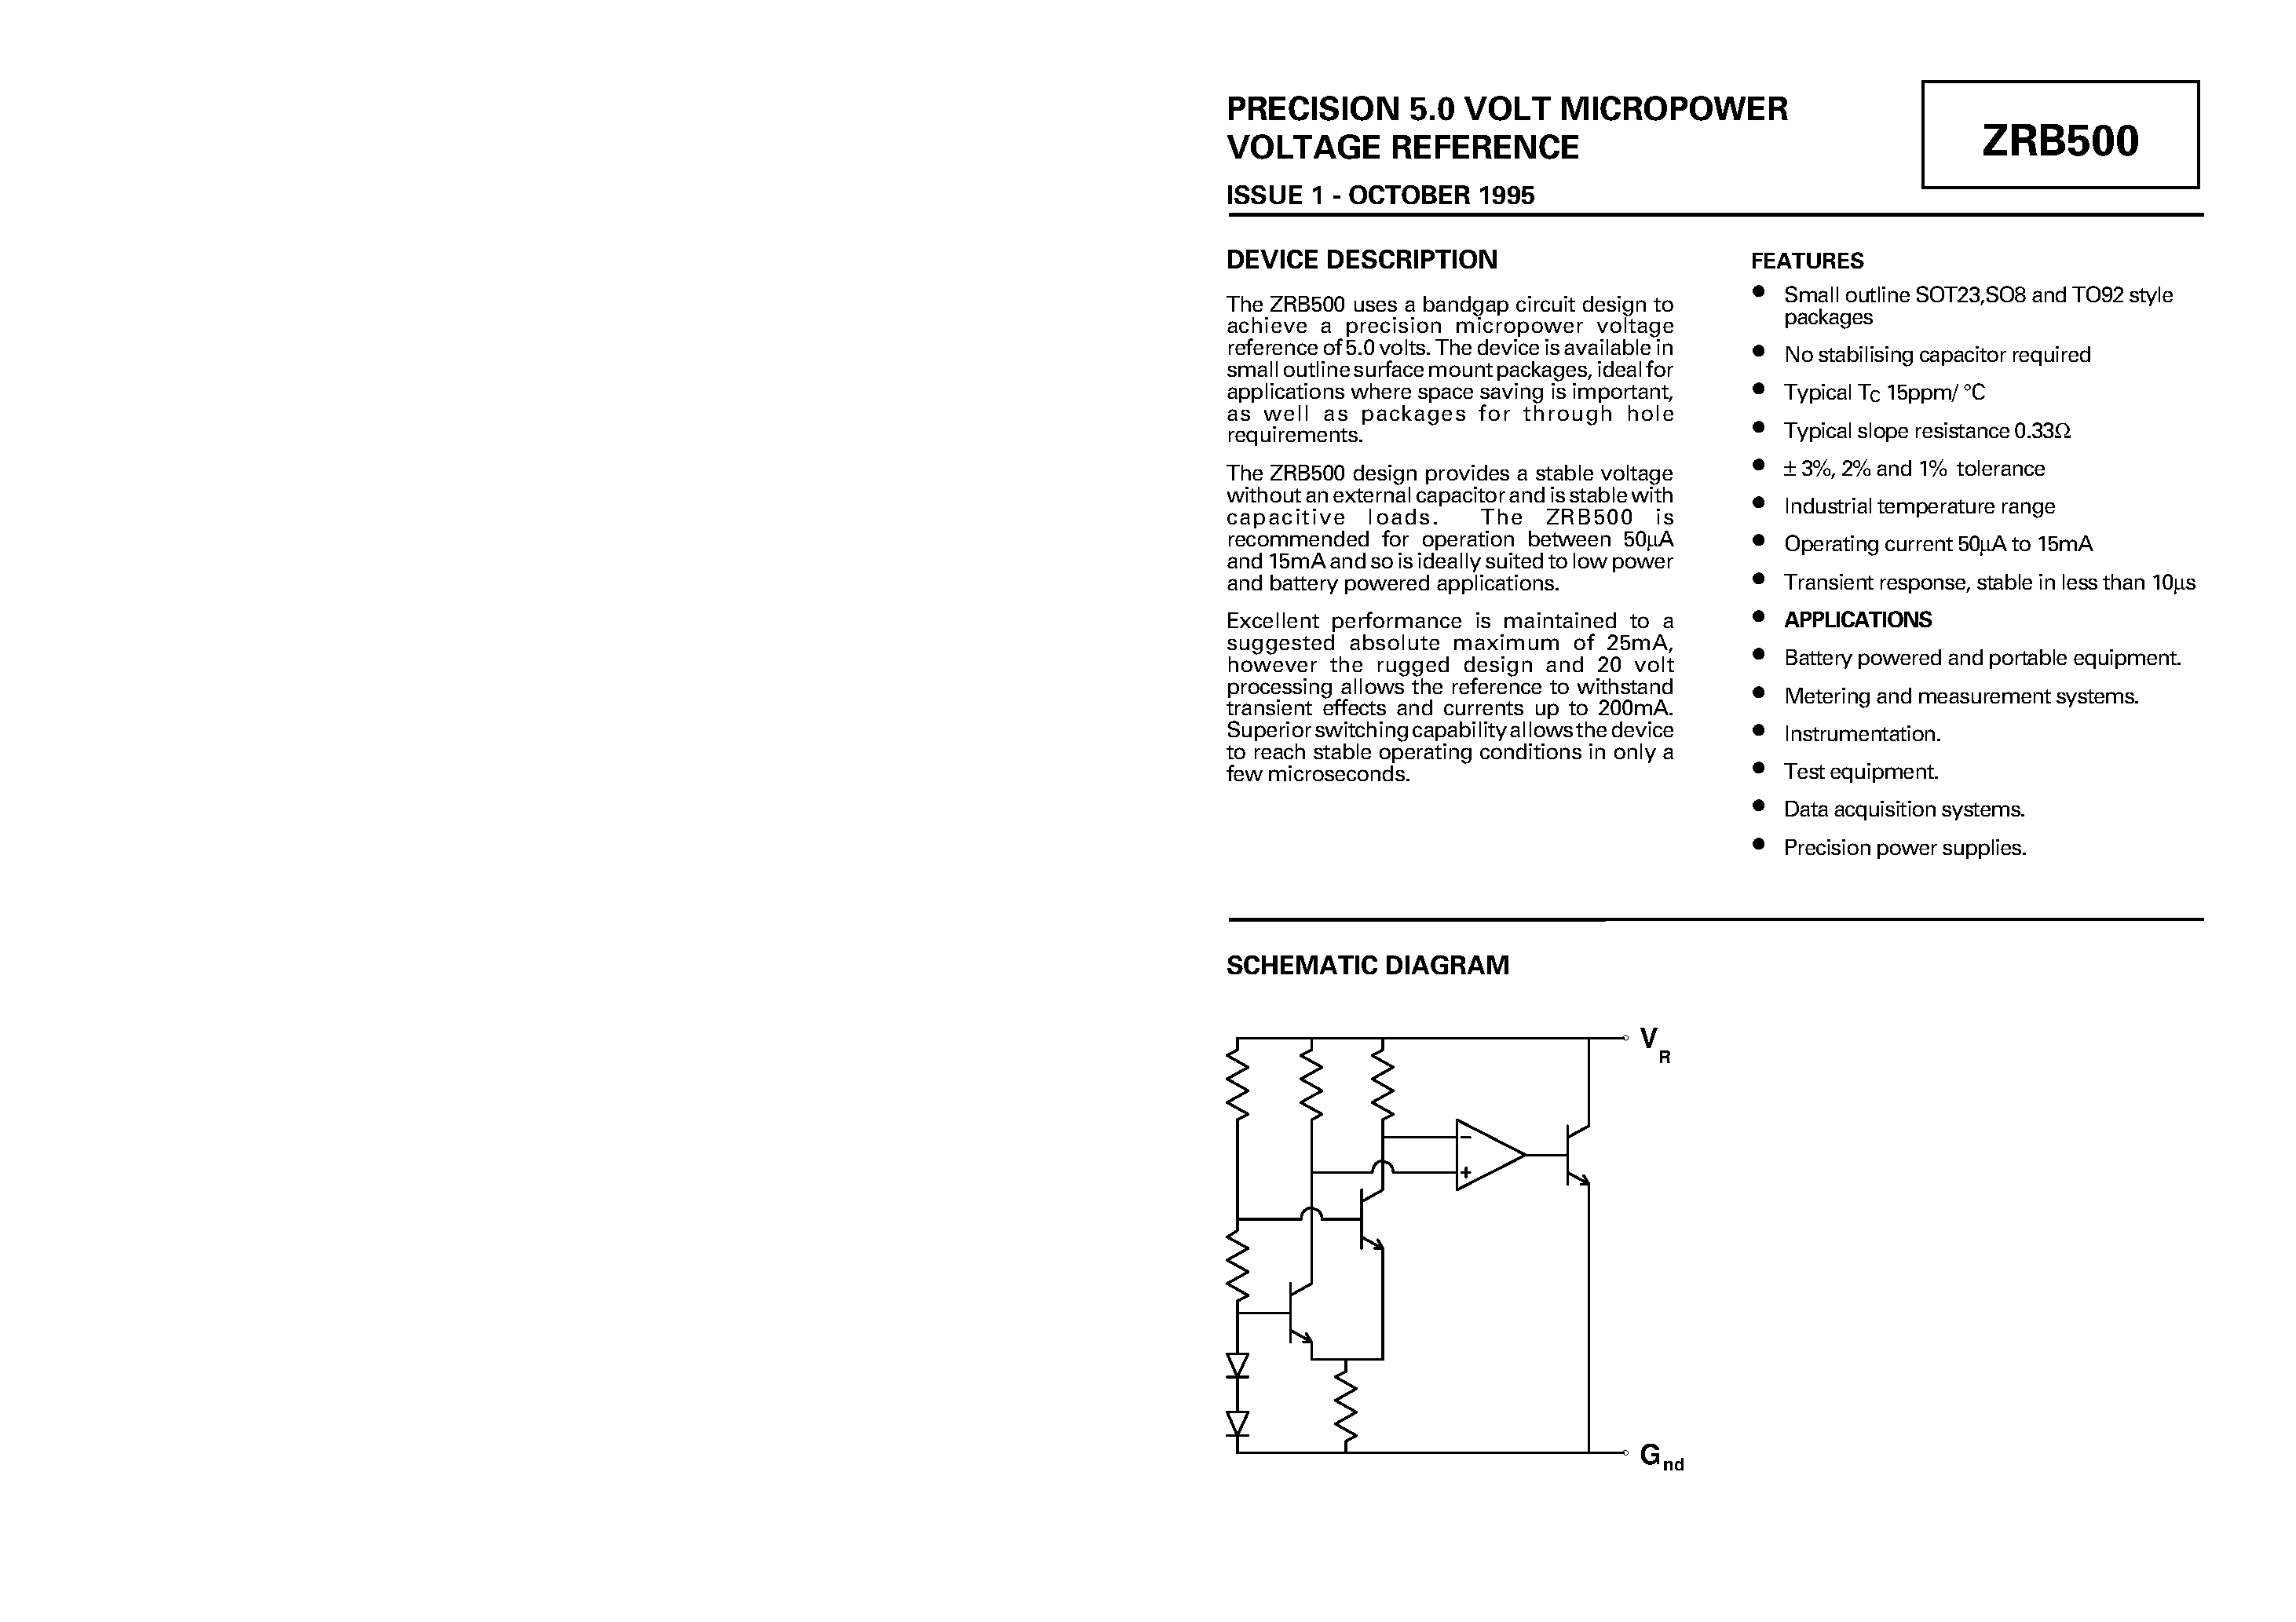 Datasheet ZRB500Y02 - PRECISION 5.0 VOLT MICROPOWER VOLTAGE REFERENCE page 1